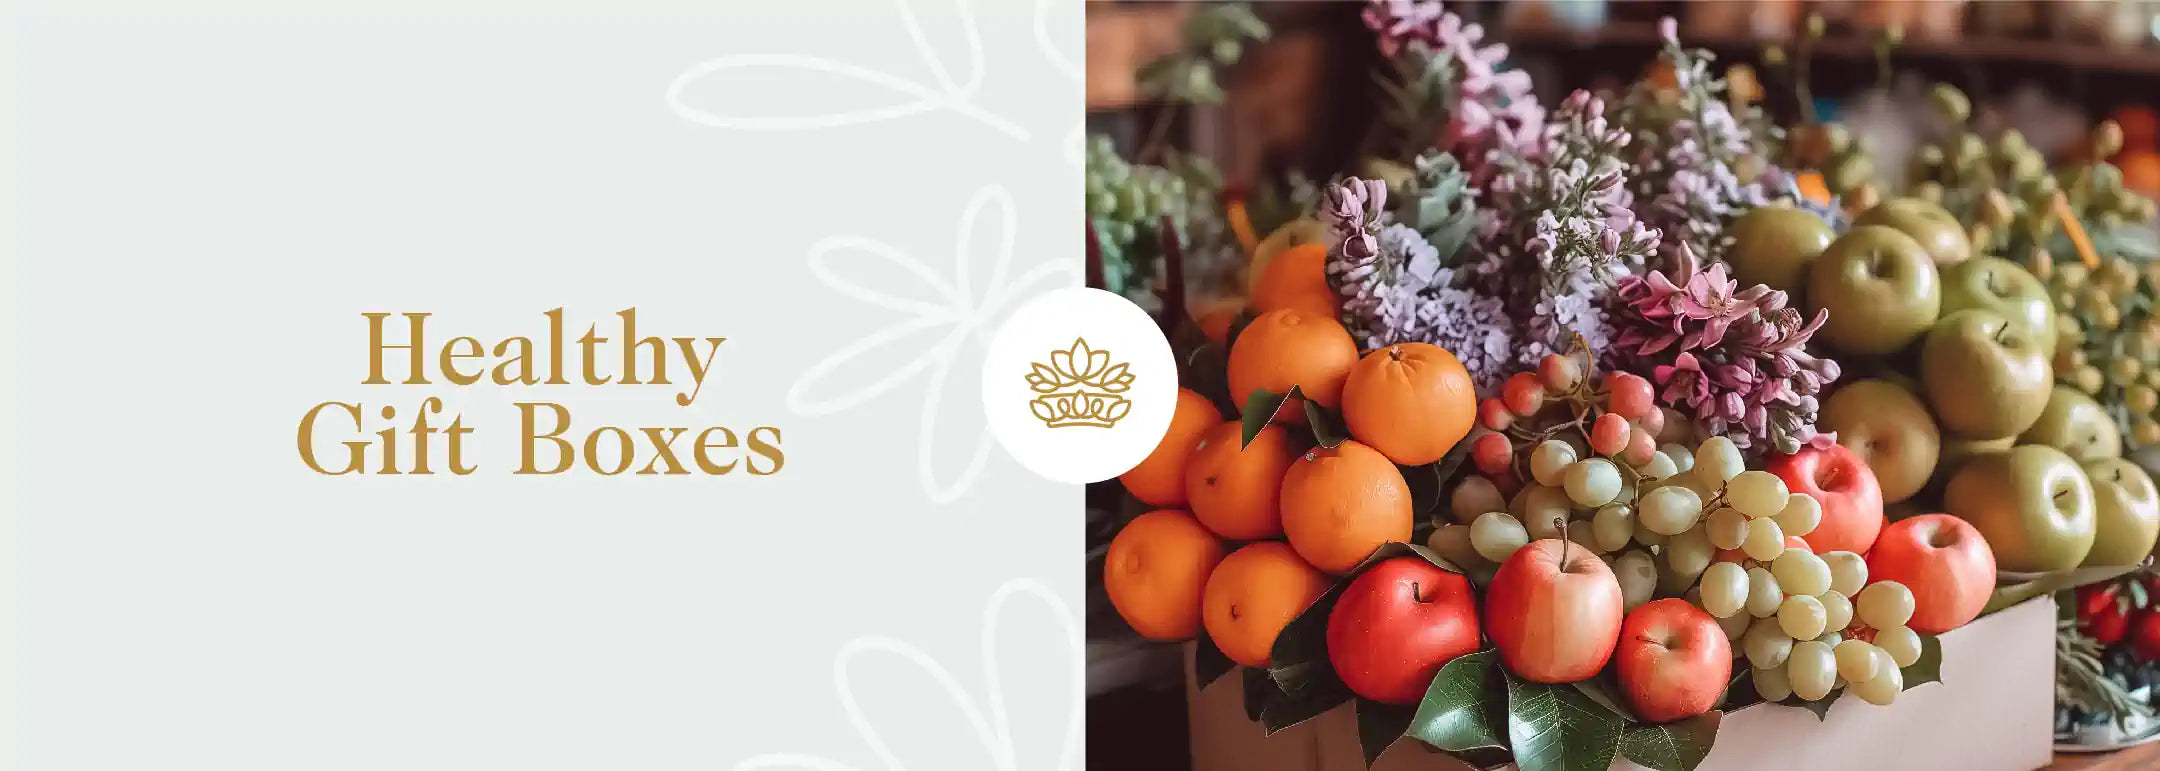 A vibrant assortment of fresh fruits including oranges, apples, and grapes, complemented by delicate purple flowers, curated into a healthy gift box. Part of the Healthy Gift Boxes Collection from Fabulous Flowers and Gifts.